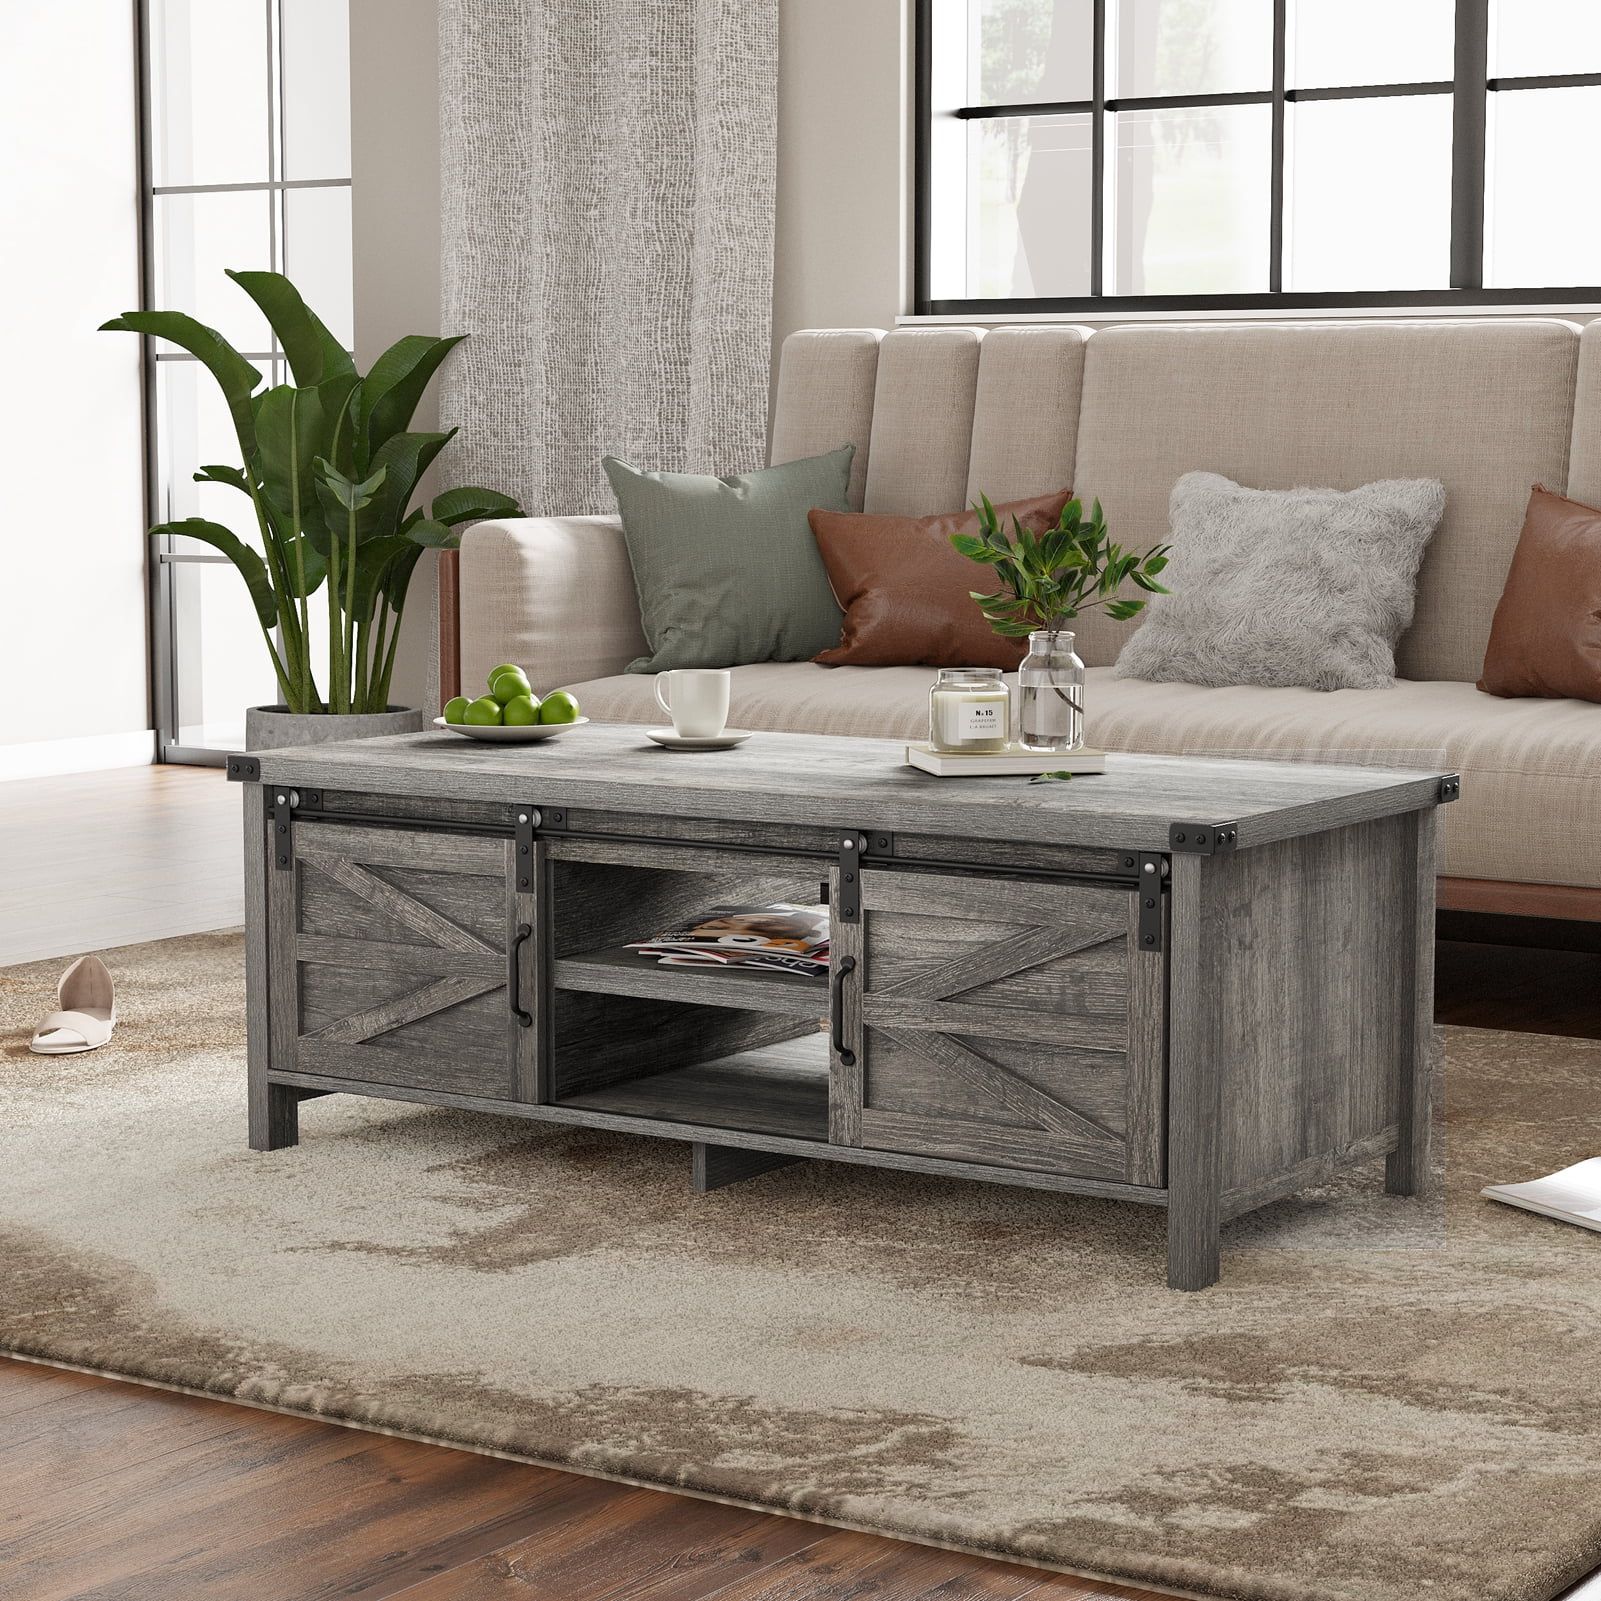 Yaoping 48" Modern Farmhouse Coffee Table With Adjustable Storage Cabinets  Shelves, Modern Coffee Table For Living Room With Sliding Barn Door –  Walmart Intended For Coffee Tables With Sliding Barn Doors (Photo 7 of 15)